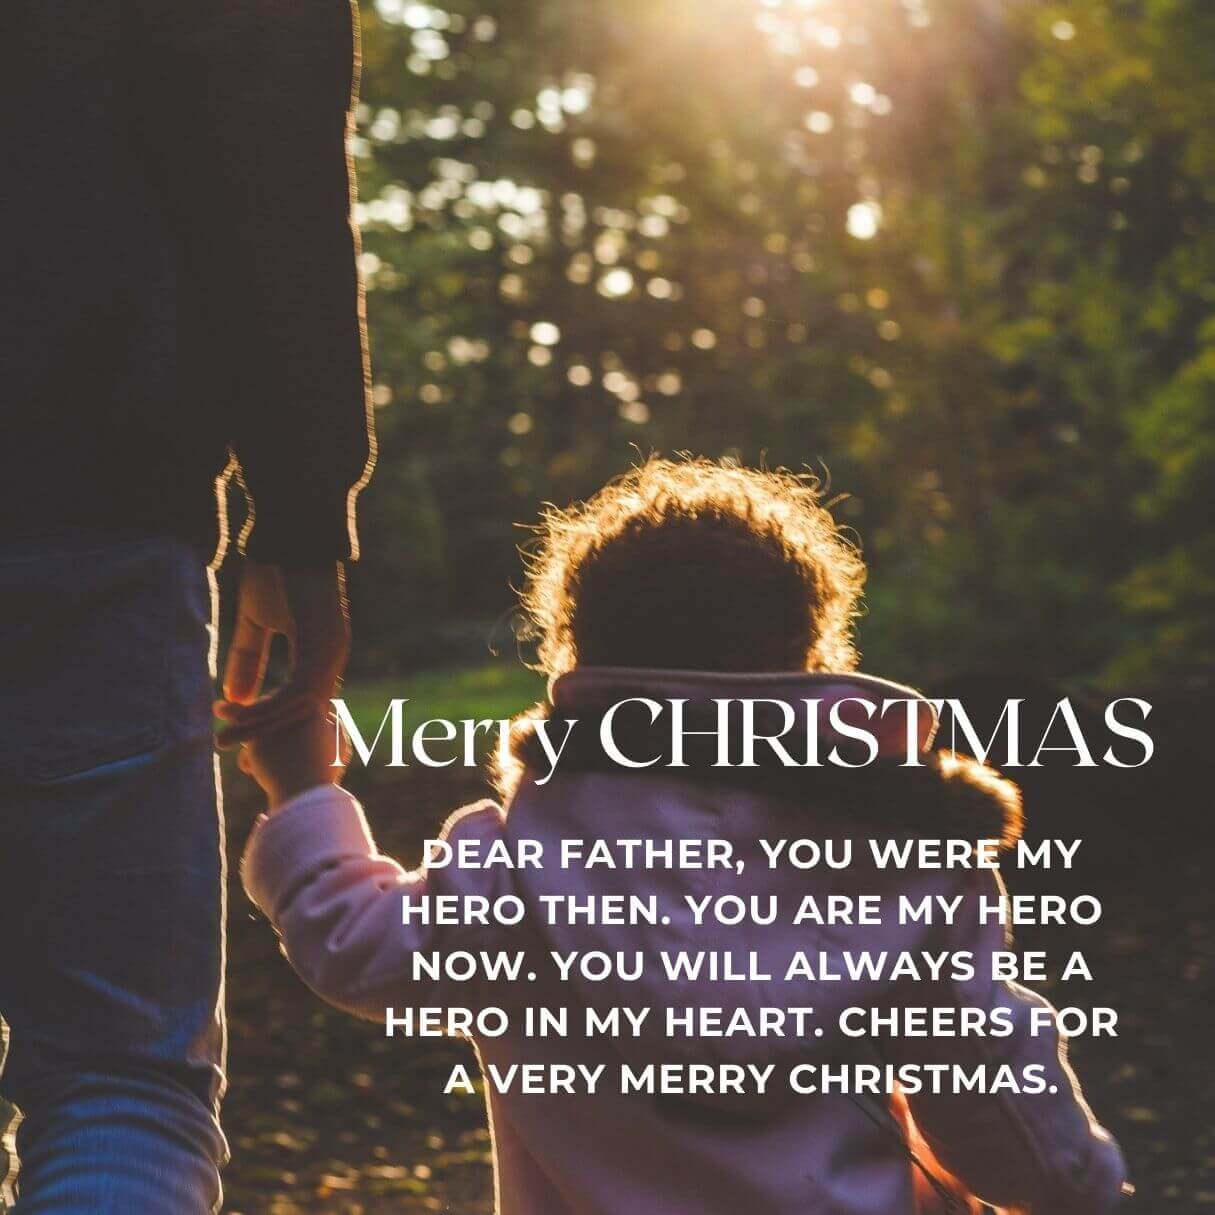 Merry Christmas Messages For Father